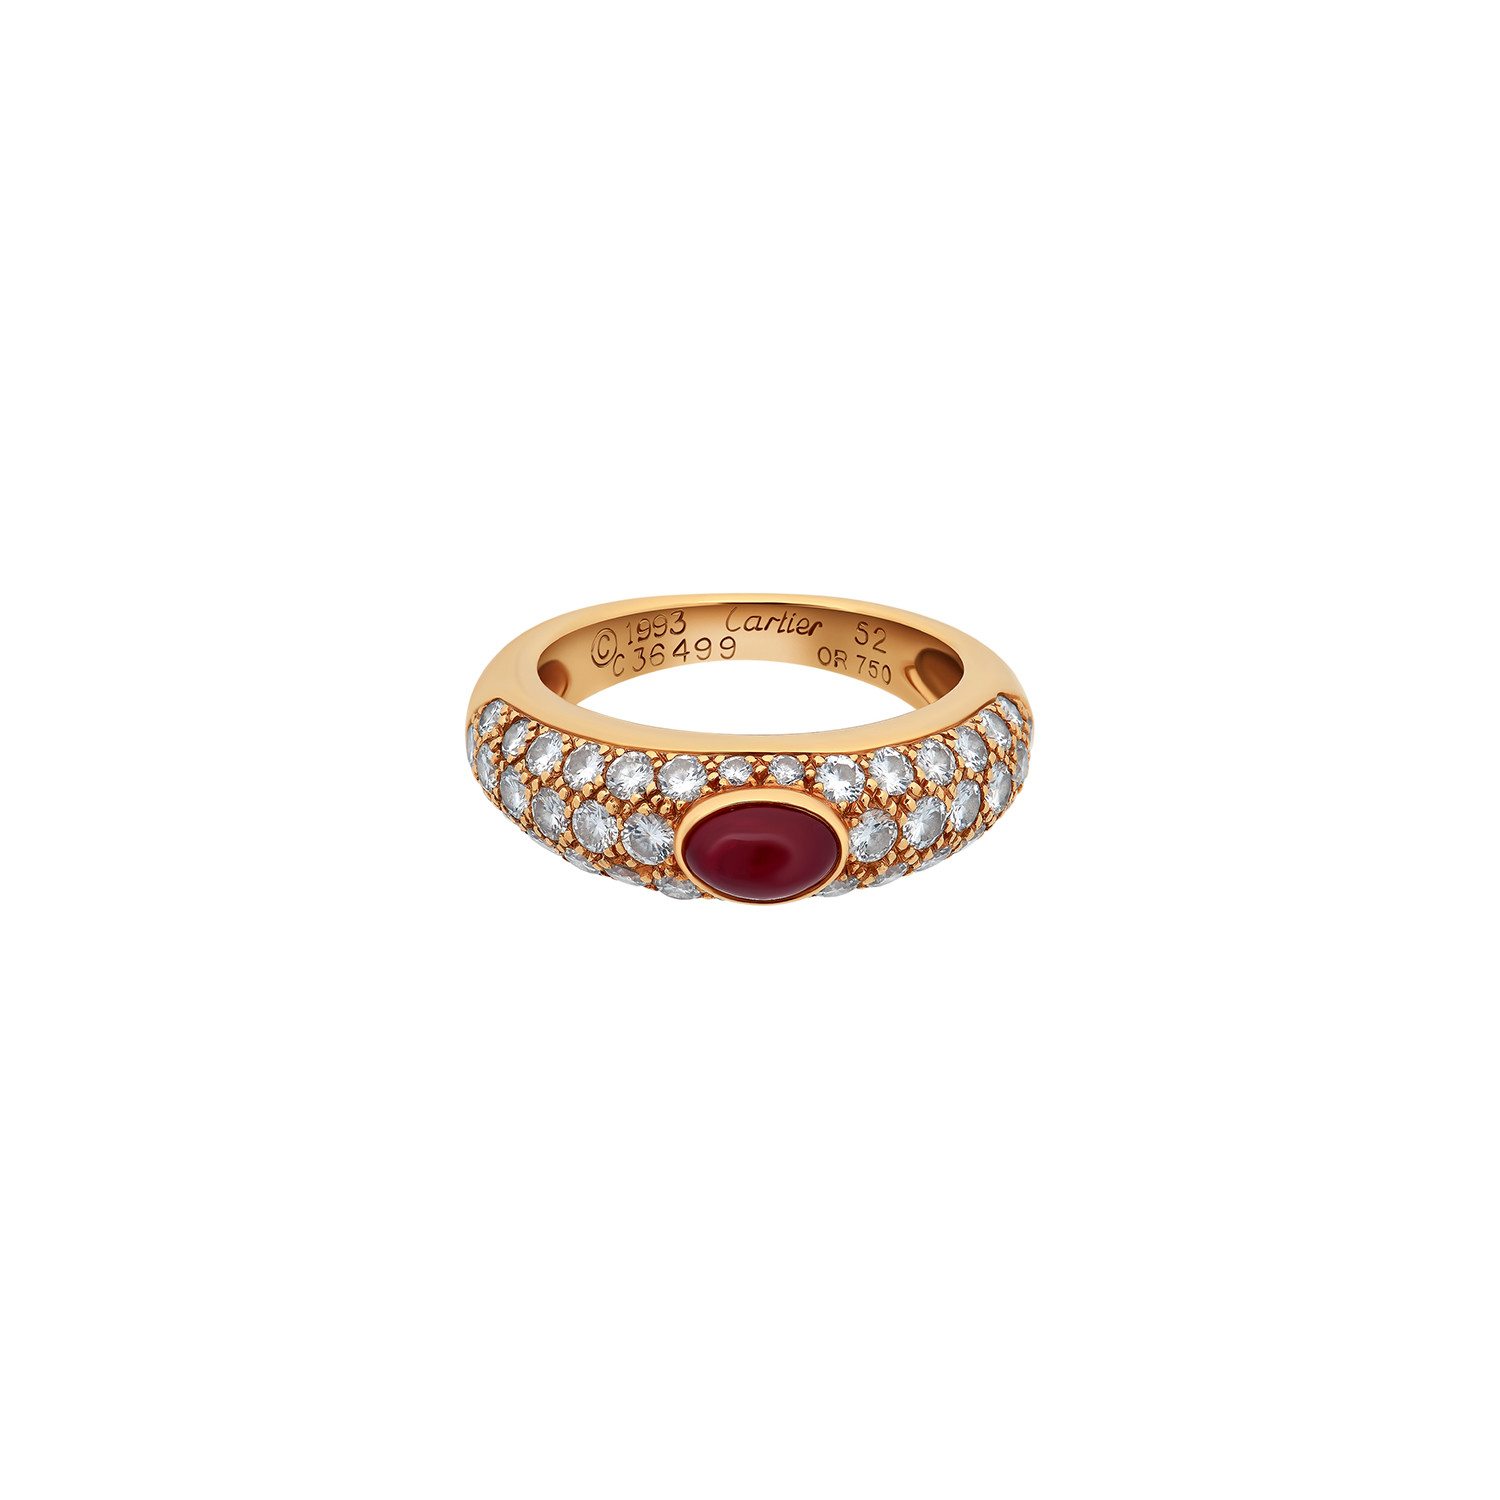 Cartier 18k Yellow Gold Diamond + Ruby Ring // Ring Size 6 // Pre